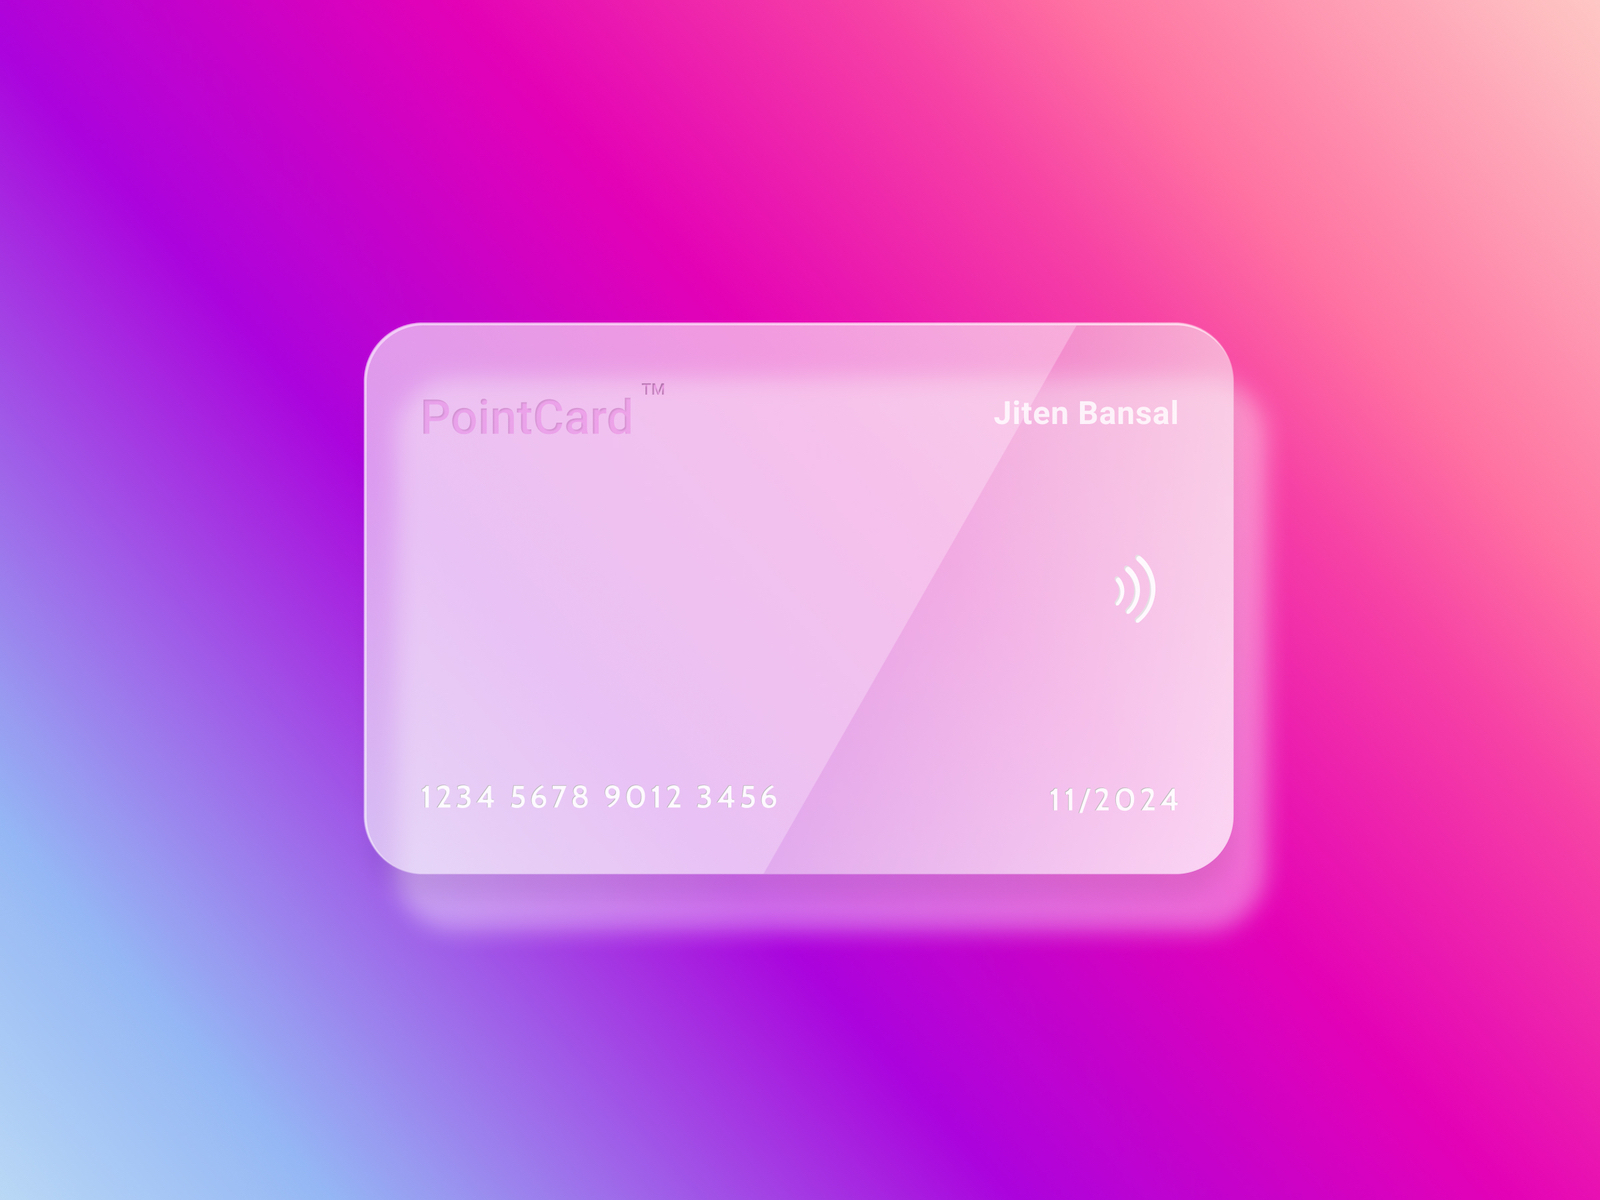 Credit card design by Bansal on Dribbble